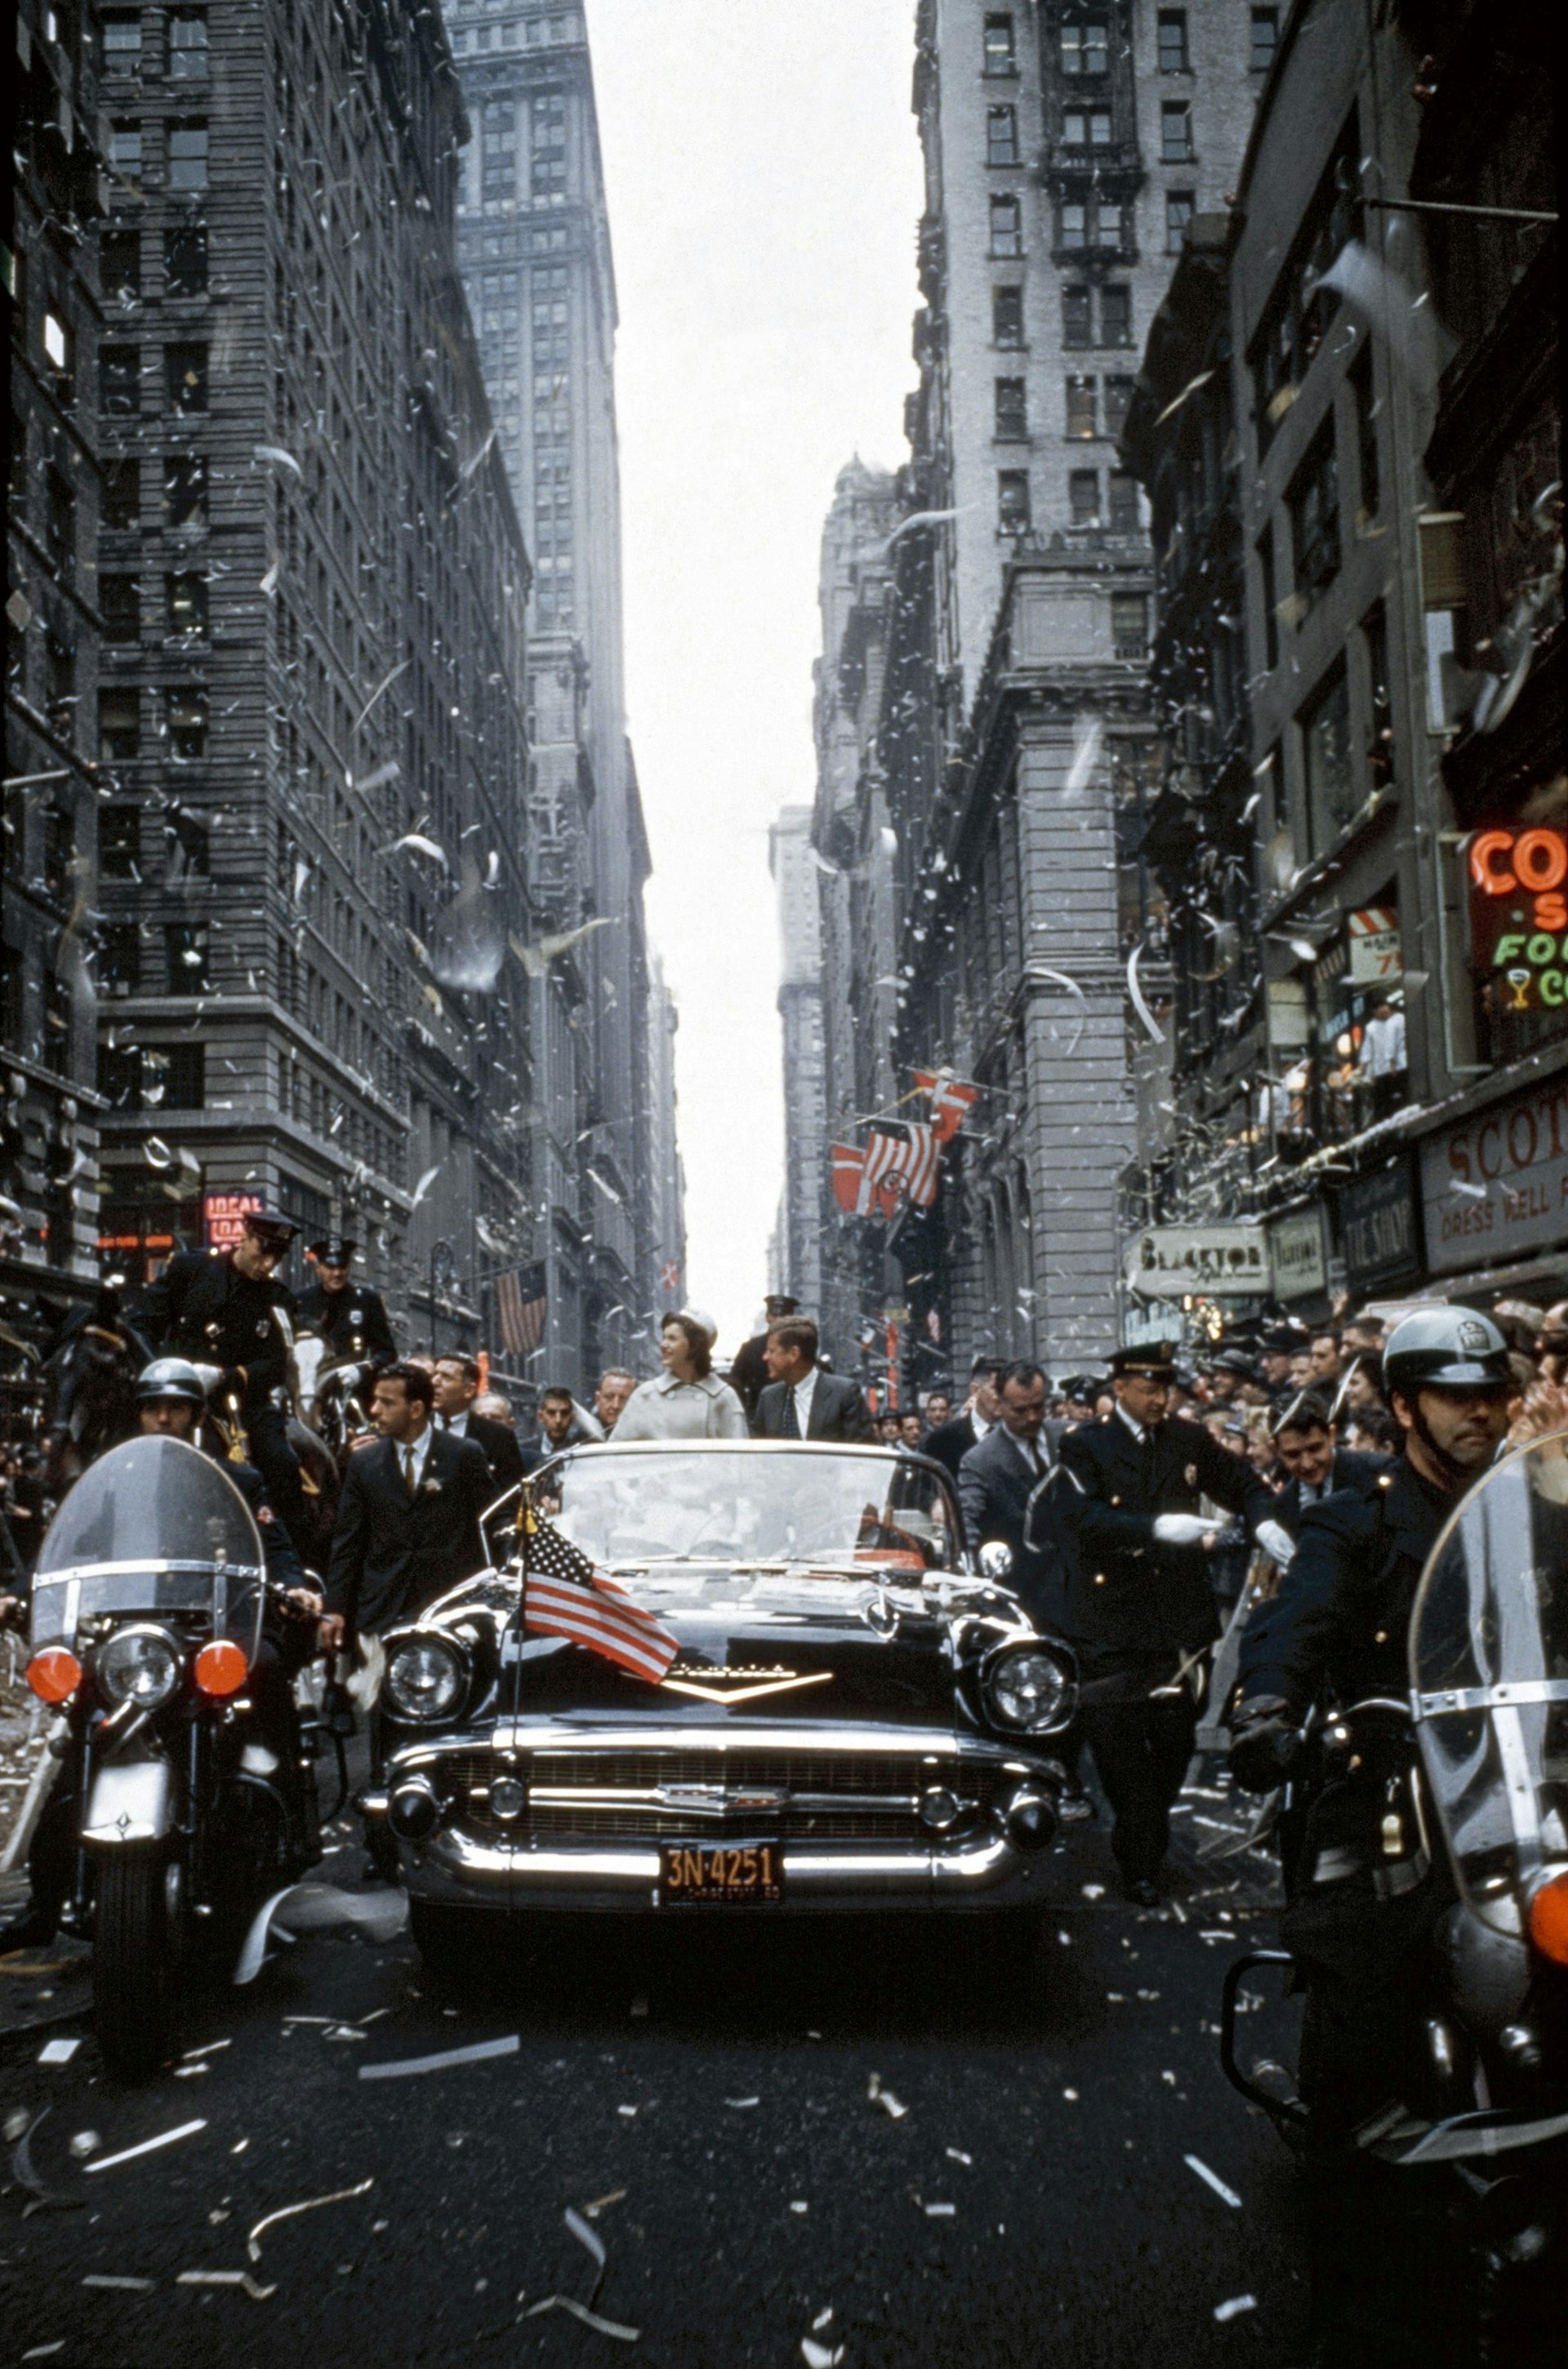 USA. New York City. 1960. Senator John F. KENNEDY and Jacqueline KENNEDY campaign during a ticker tape parade in Manhattan. Photo by Cornell Capa © International Center of Photography.